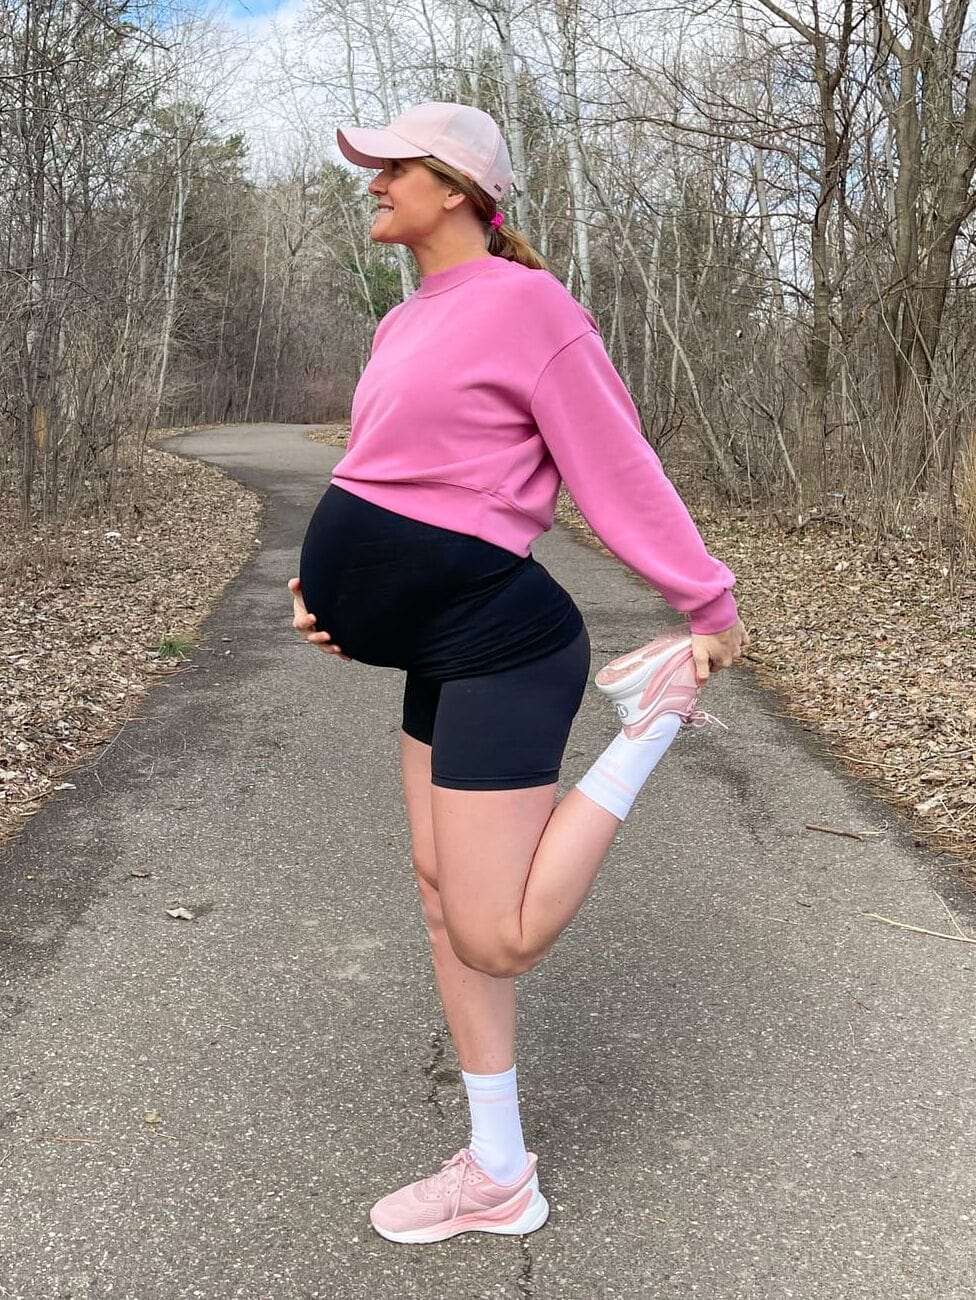 pregnant woman in pink sweatshirt wearing lululemon running shoes on a trail in the woods